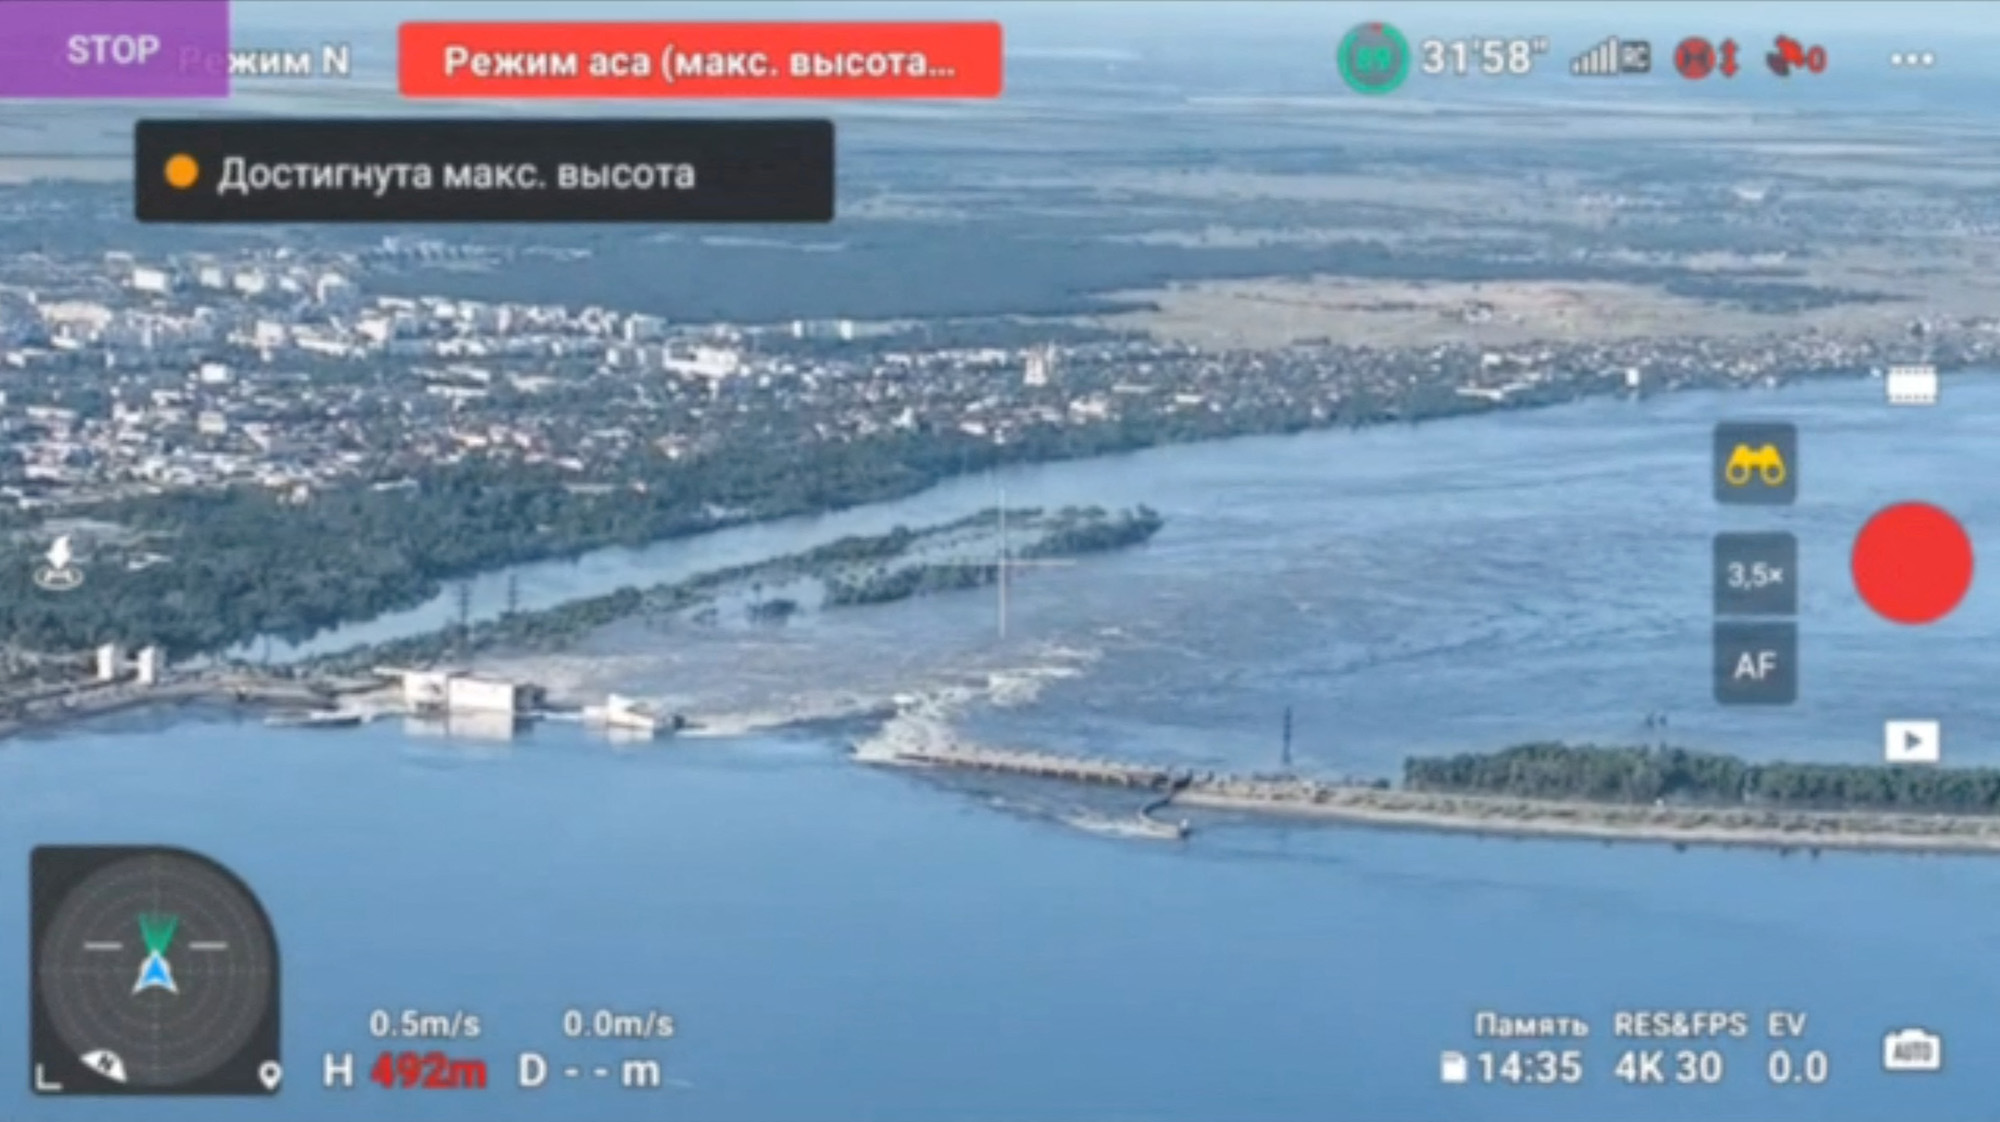 Blown up dam on the Dnieper. Satellite photos have been released